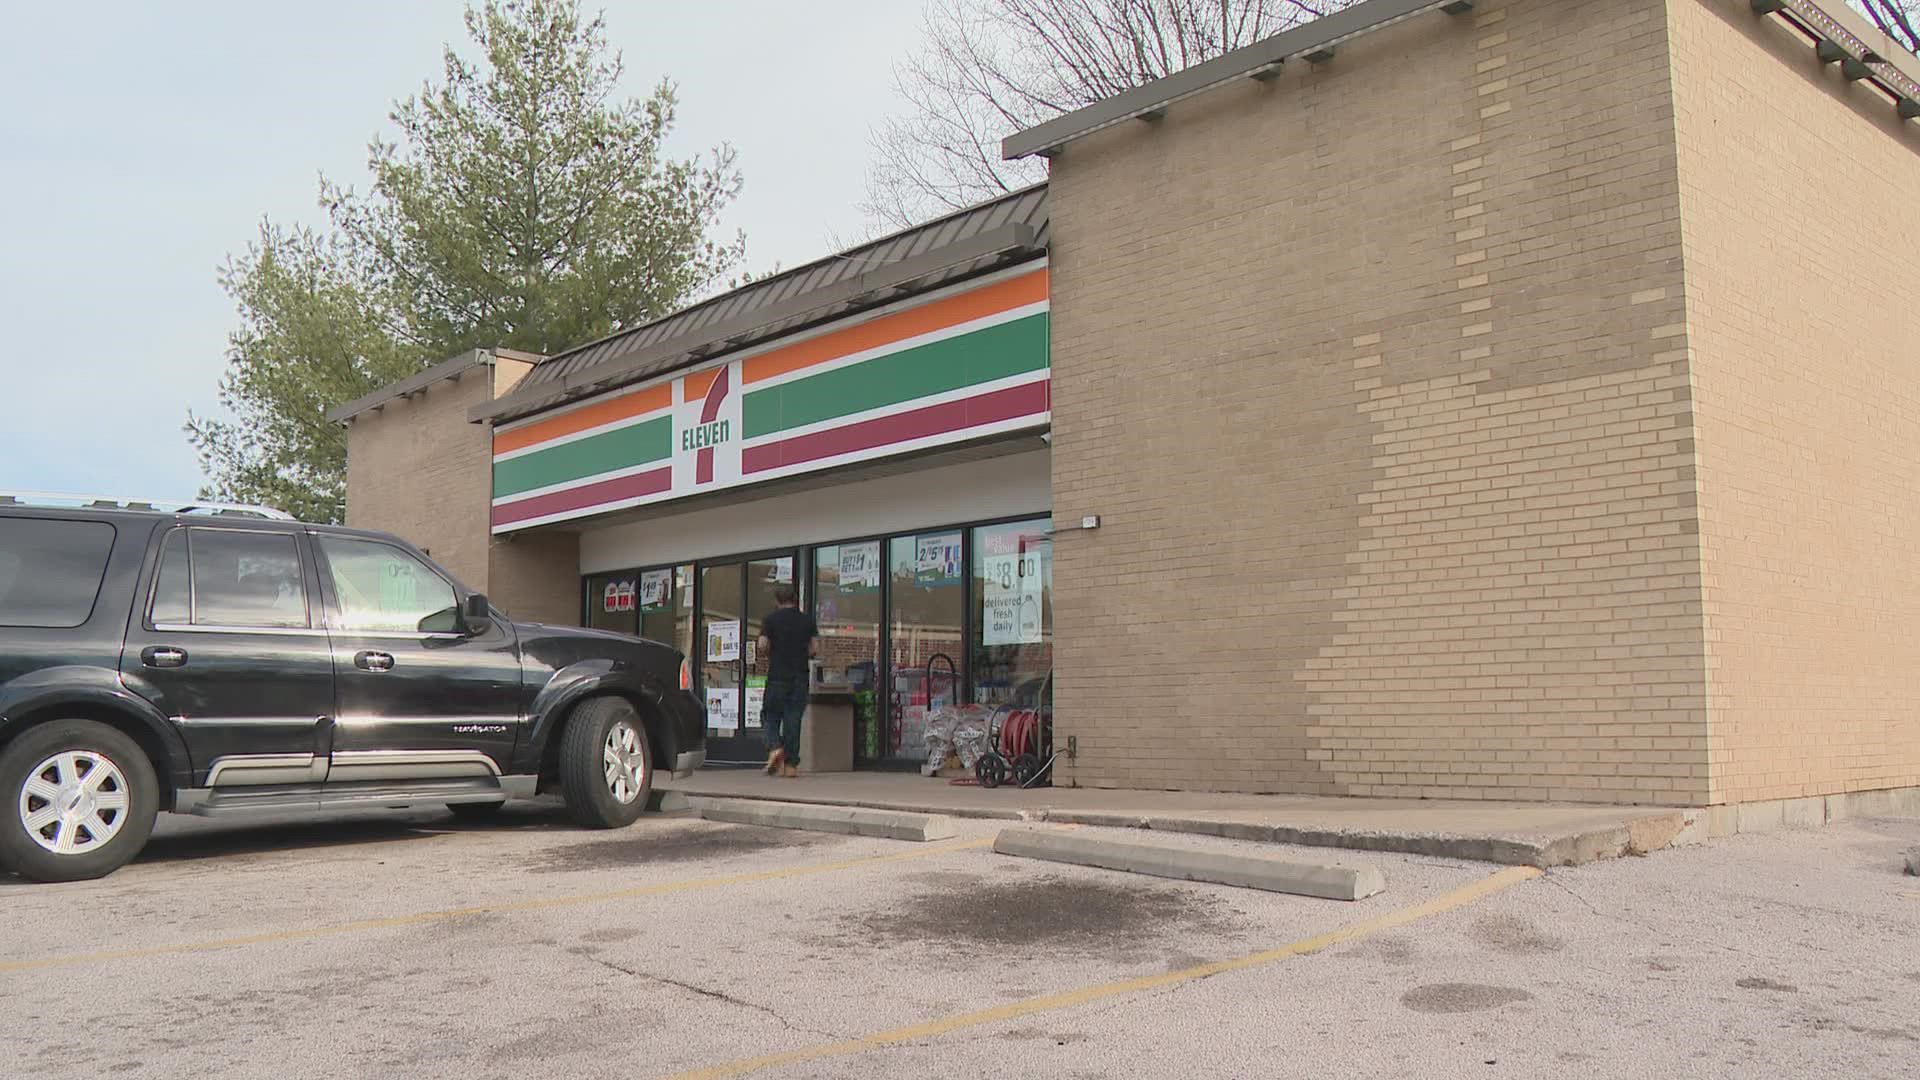 Check your tickets! The Missouri Lottery announced that a winning $1 million Mega Millions ticket was purchased at the 7-Eleven at 900 Shackleford Rd. in Florissant.